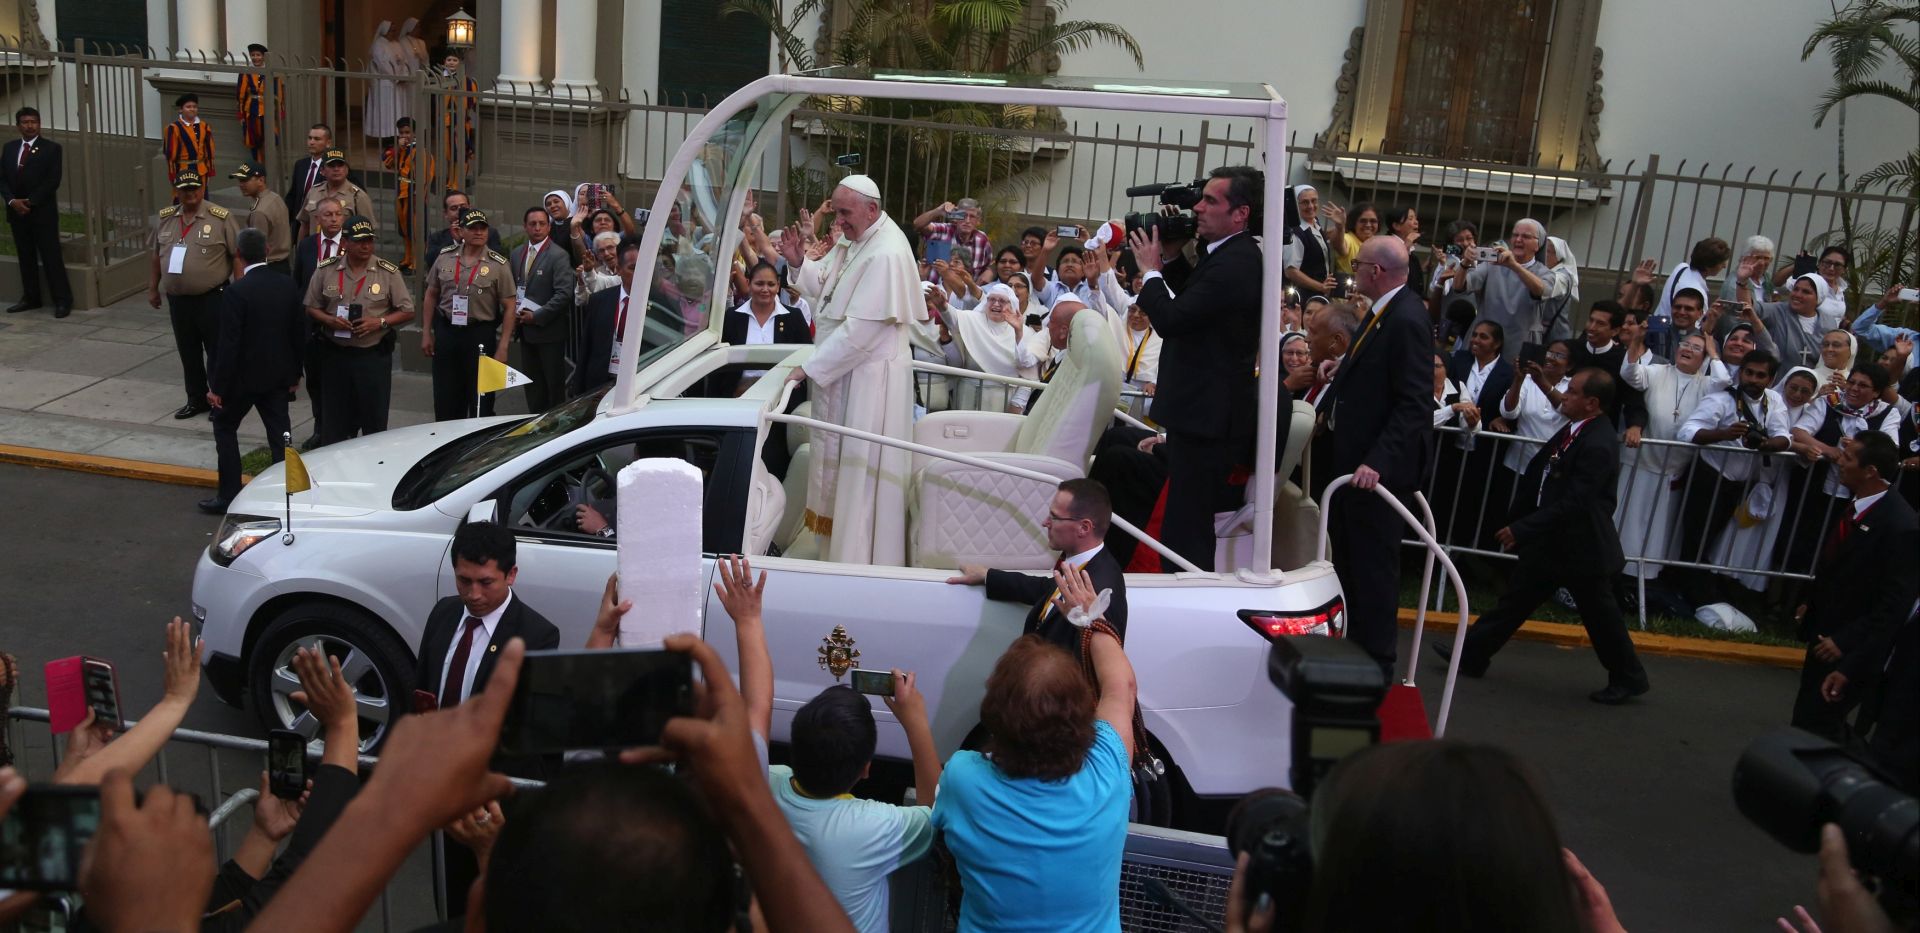 epa06452139 Pope Francis greets devotees at his arrival to the apostolic nunciature in Lima, Peru, 18 January 2018. The pontiff arrived in the Peruvian capital from Chile for a three day visit.  EPA/Sebastian Castaneda